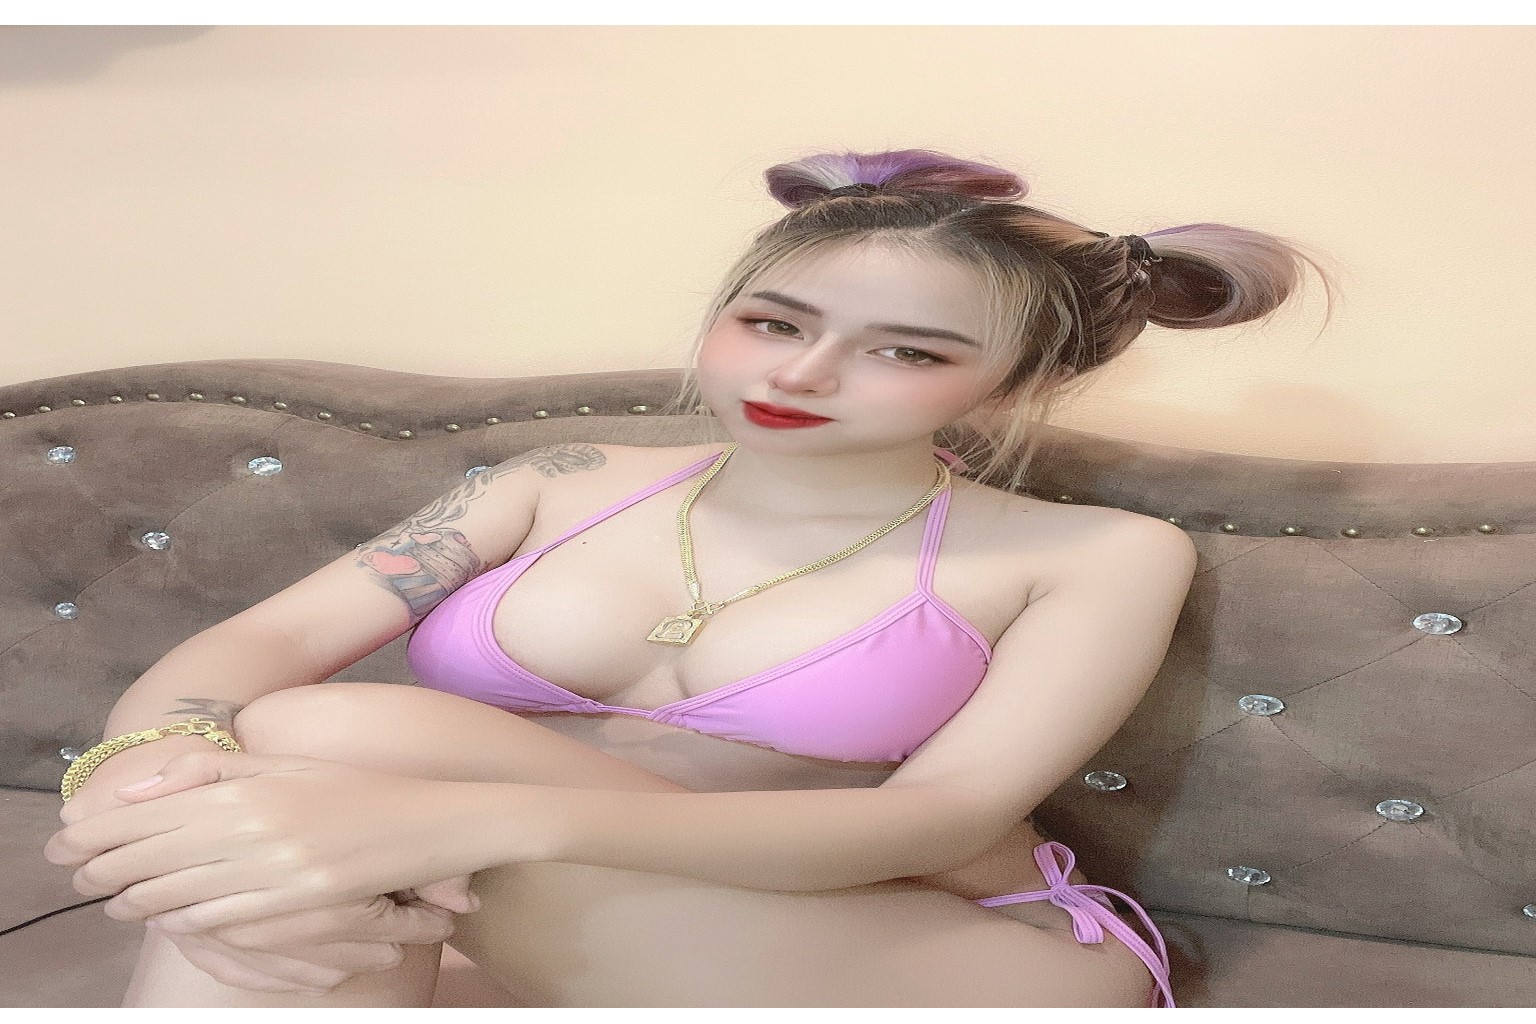 Nong Pink, A Tattooed Girl With Good Work, Has Live Sex Until He Cums Inside.
